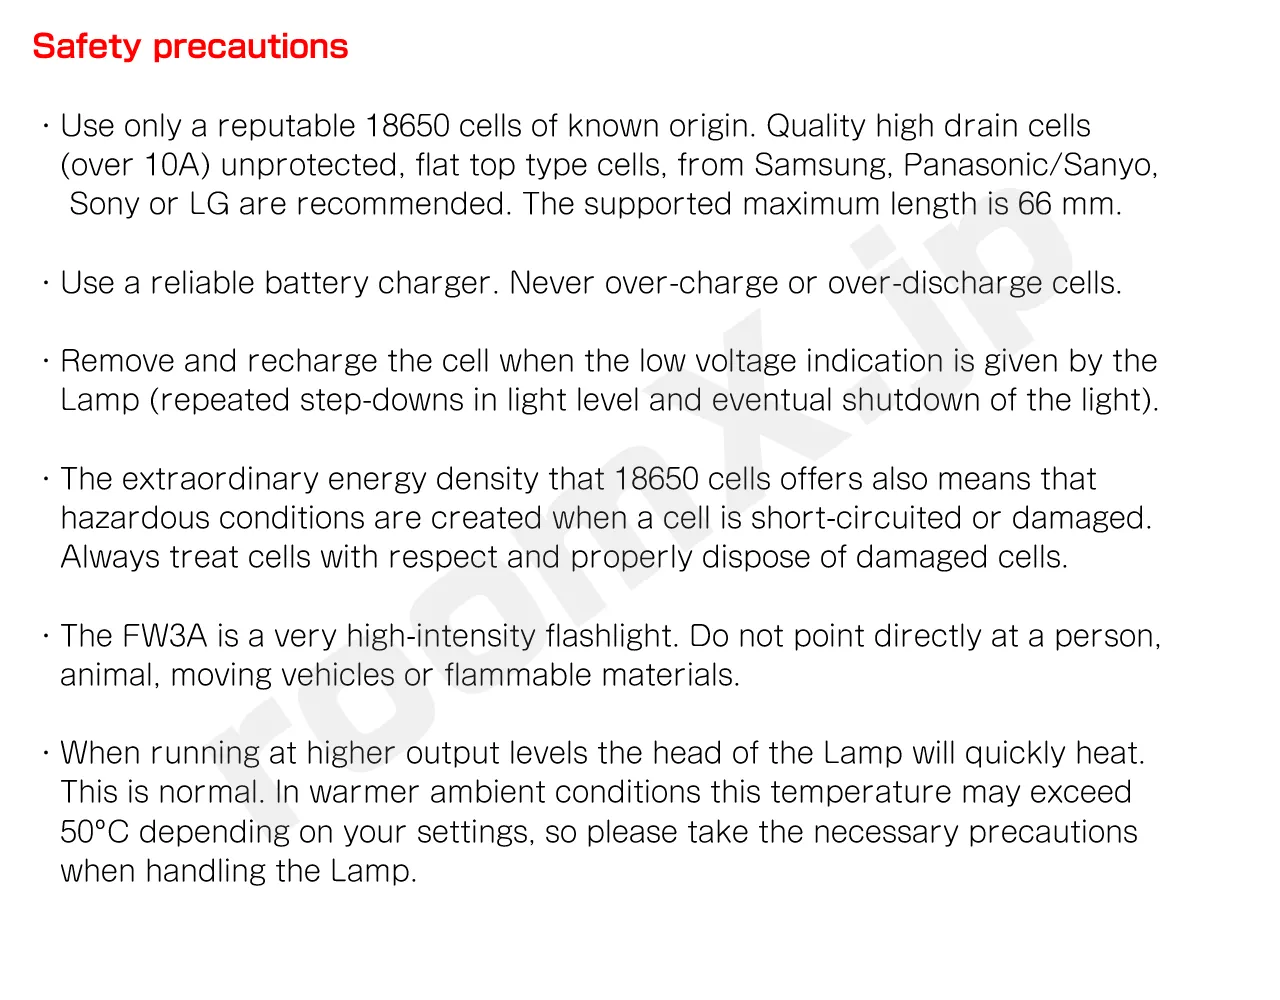 LUMINTOP FW3A / Safety precautions